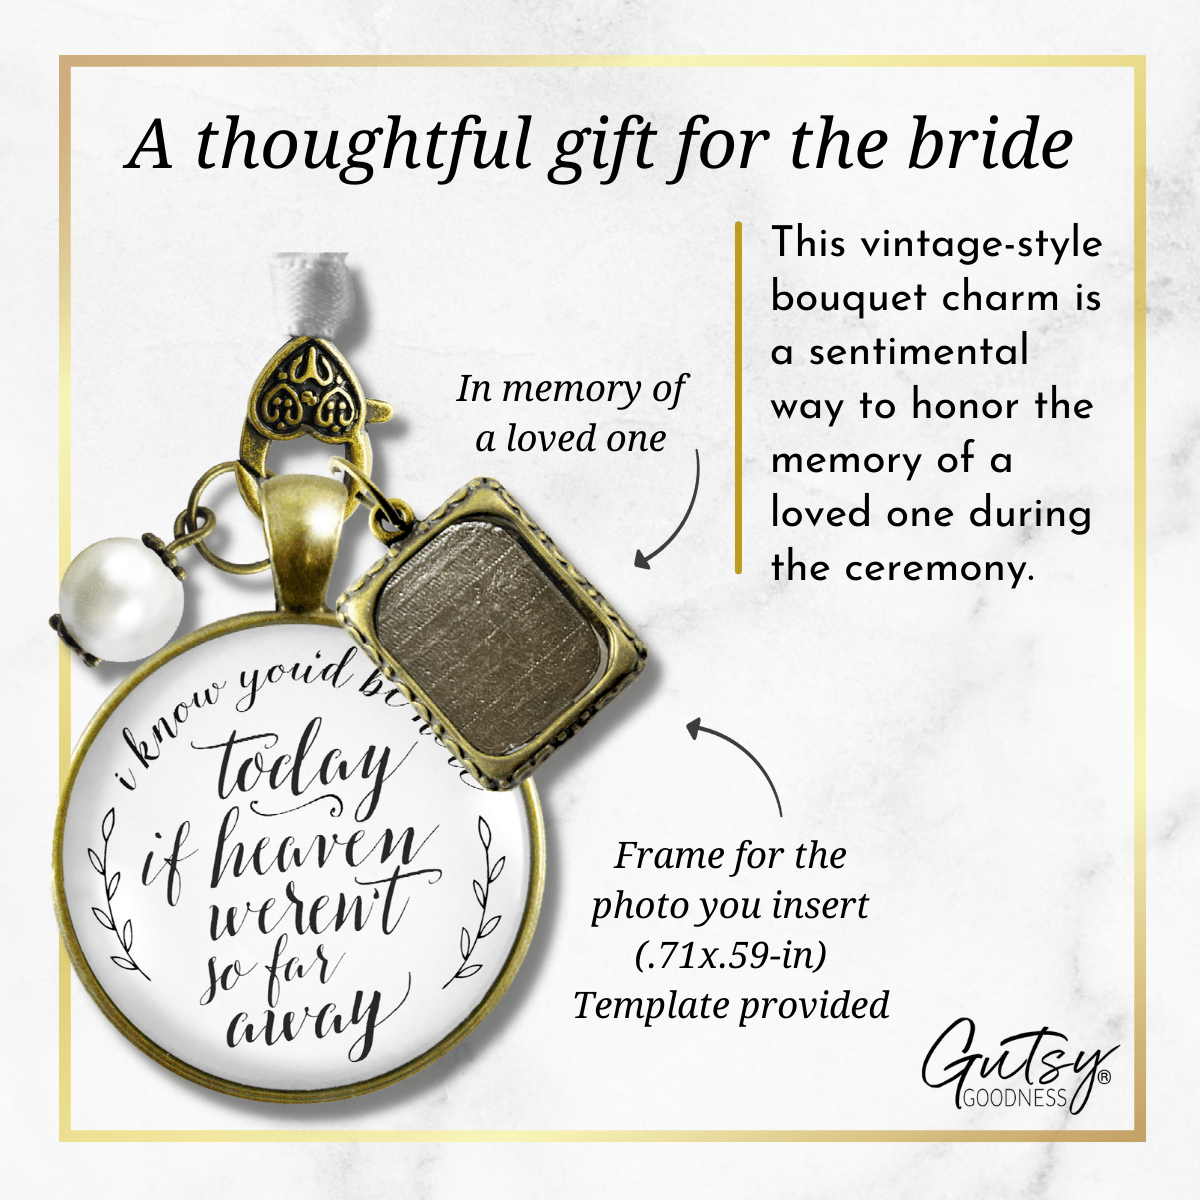 Wedding Bouquet Memorial Charm I Know You'd Be Here Today Heaven White Photo Jewels - Gutsy Goodness Handmade Jewelry Gifts